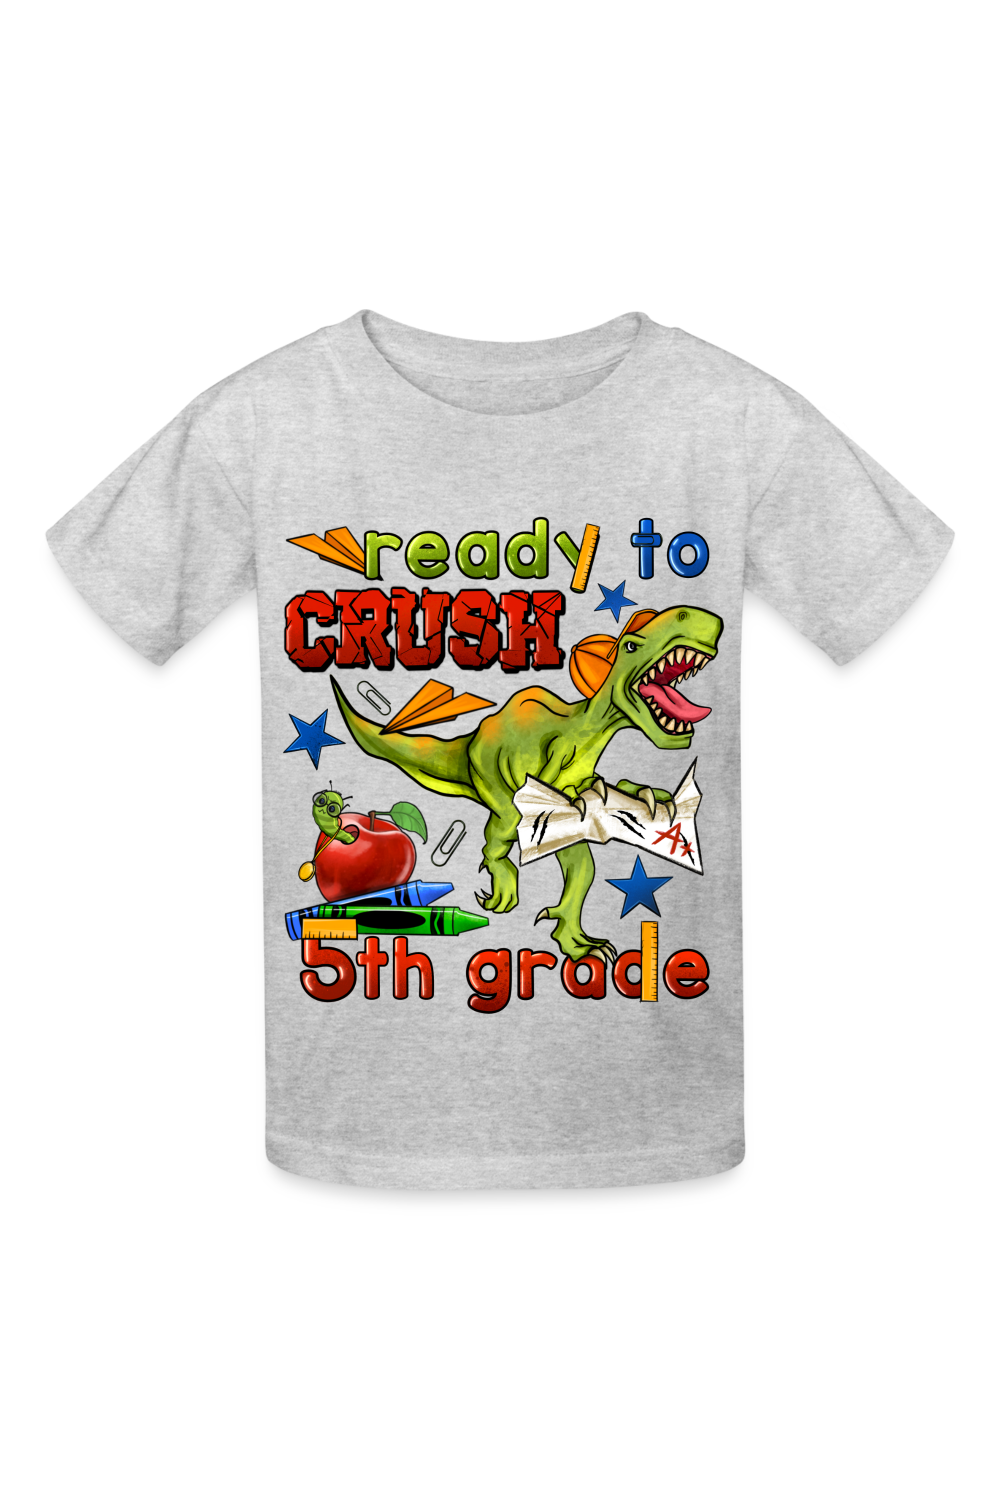 Boys Ready To Crush Fifth Grade Short Sleeve Tee Shirts for Back To School - heather gray